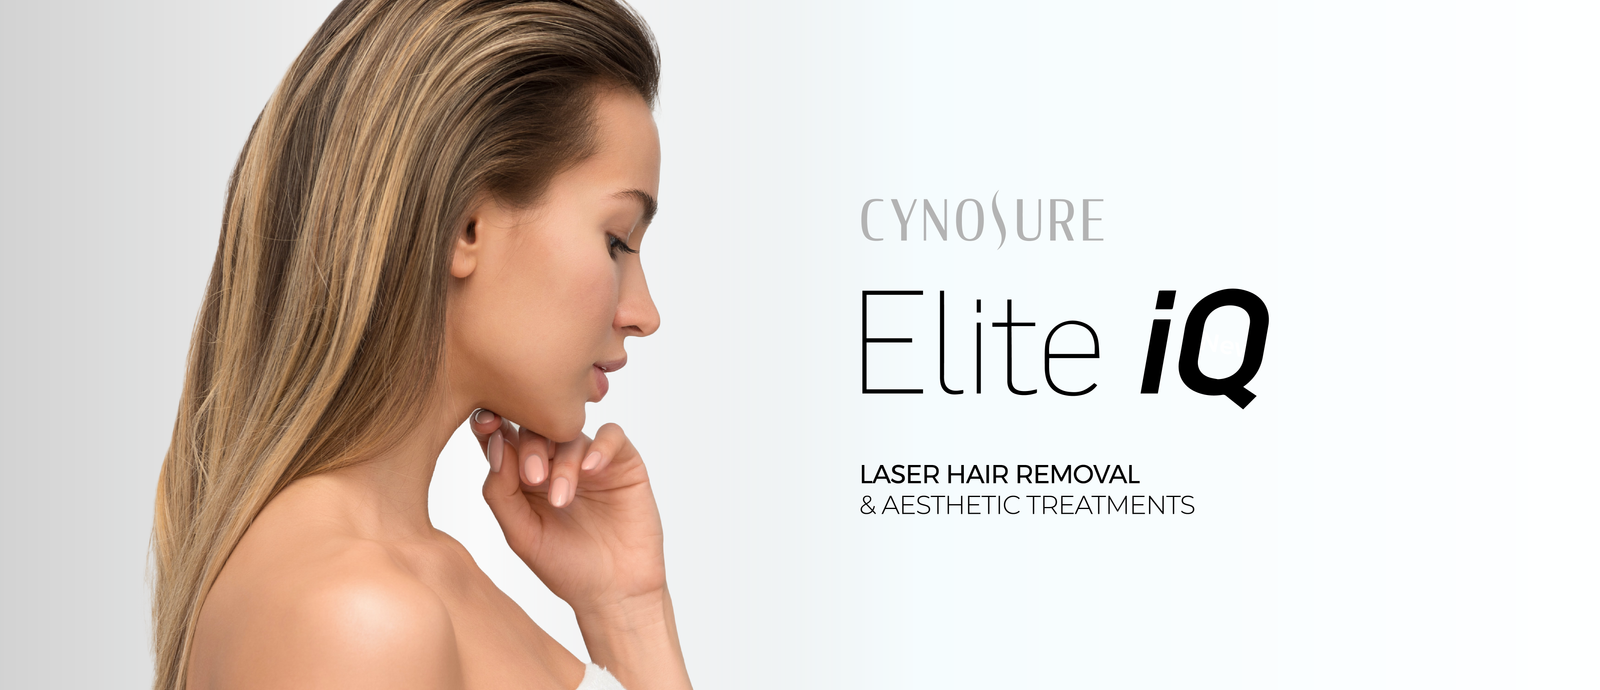 Laser Hair Removal and Aesthetic Treatments with Elite iQ from Cynosure, available at Papillon Bleu Aesthetics in Coquitlam, British Columbia Canada